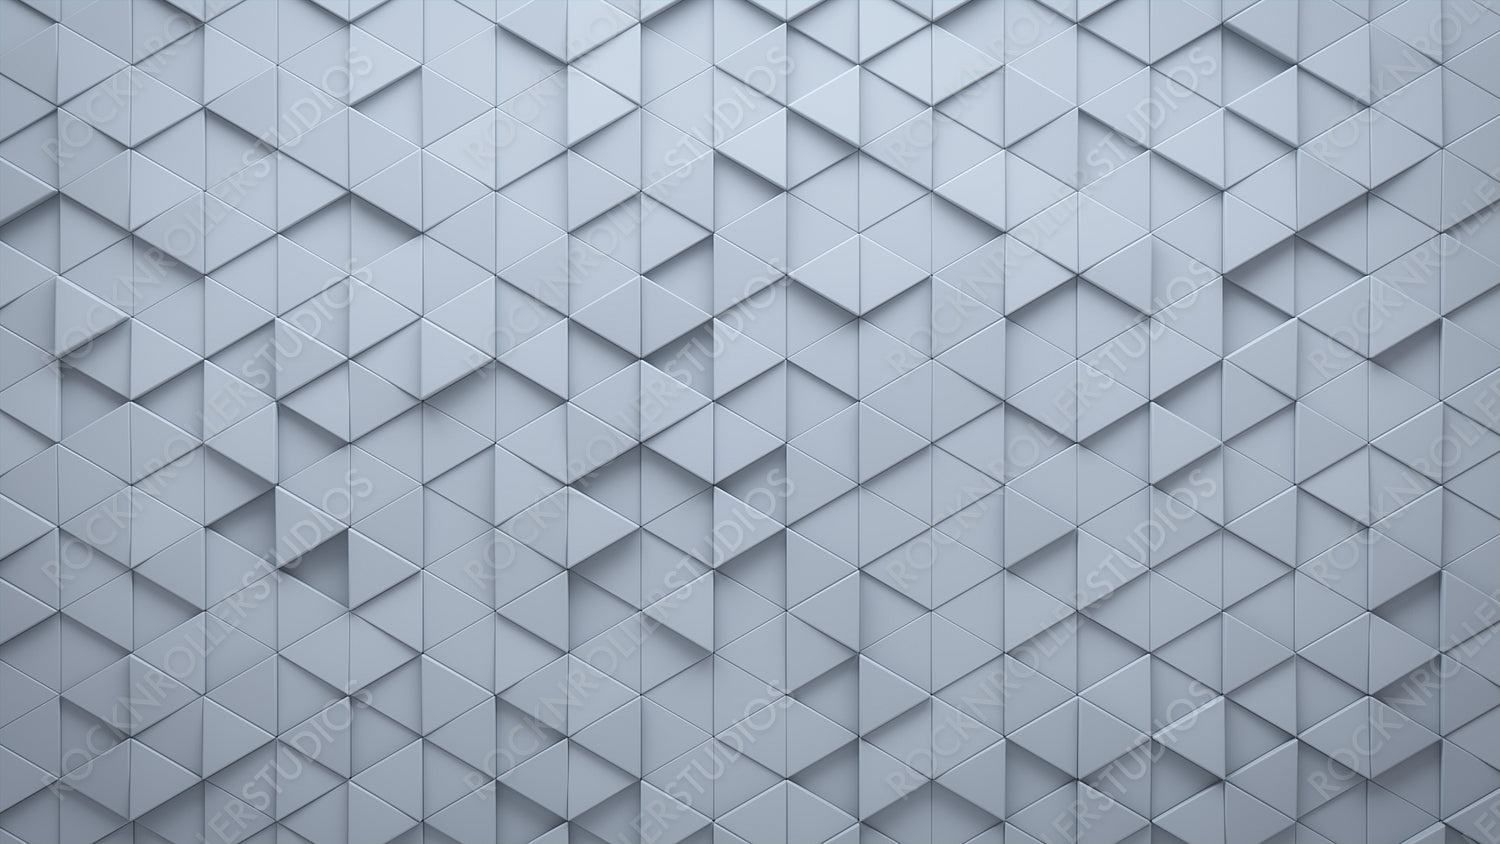 3D, Futuristic Wall background with tiles. Polished, tile Wallpaper with Triangular, White blocks. 3D Render